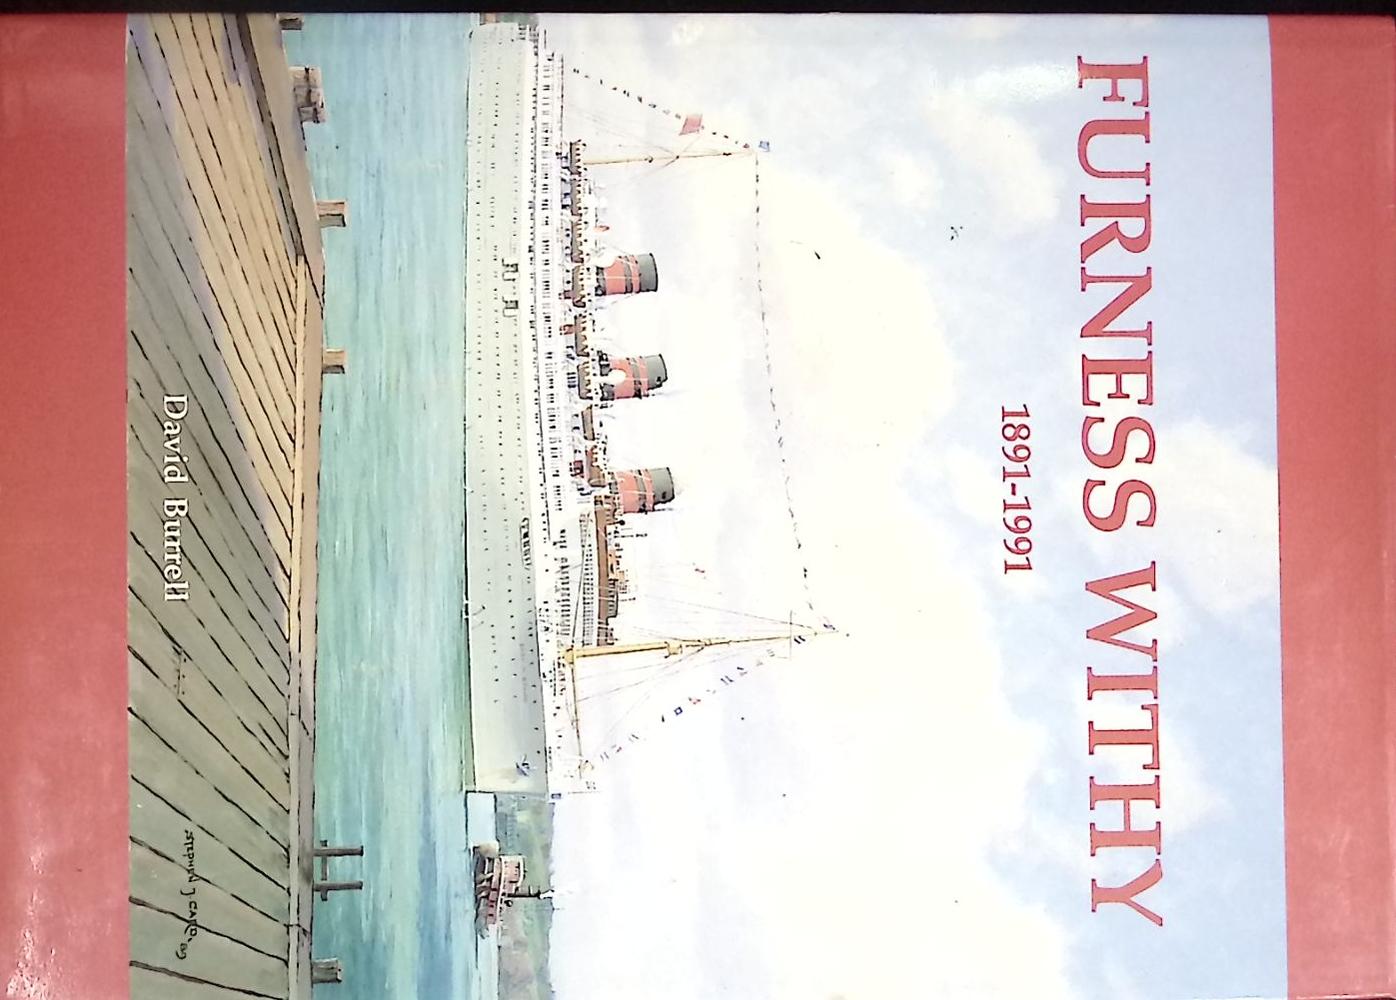 Furness Withy. The Centenary History of Furness, Withy and Company Ltd. 1891-1991.